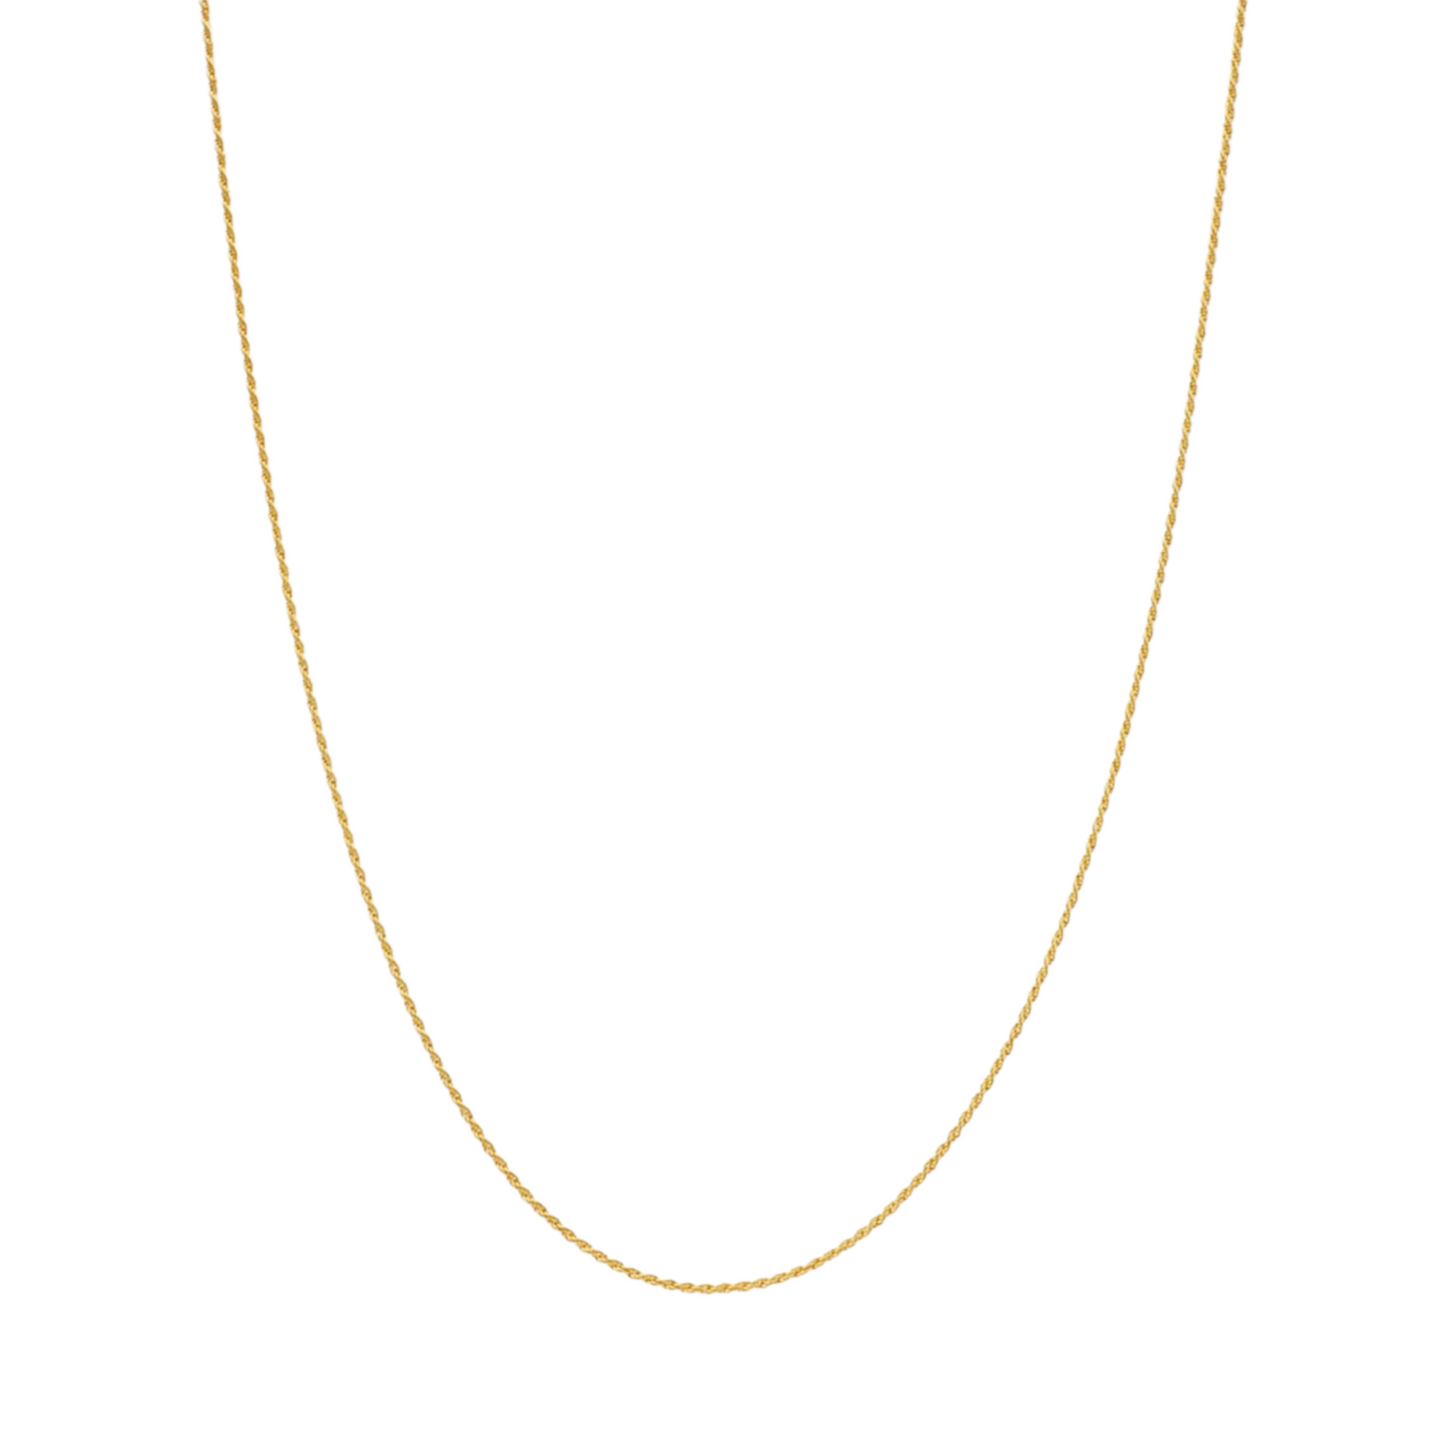 Thin Rope Chain 20 Necklace i Gold Over 'Silver 20 inchGiani Bernini Thin Rope Chain 20" Necklace (1.5mm) in 18k Gold-Plate Over Sterling Silver